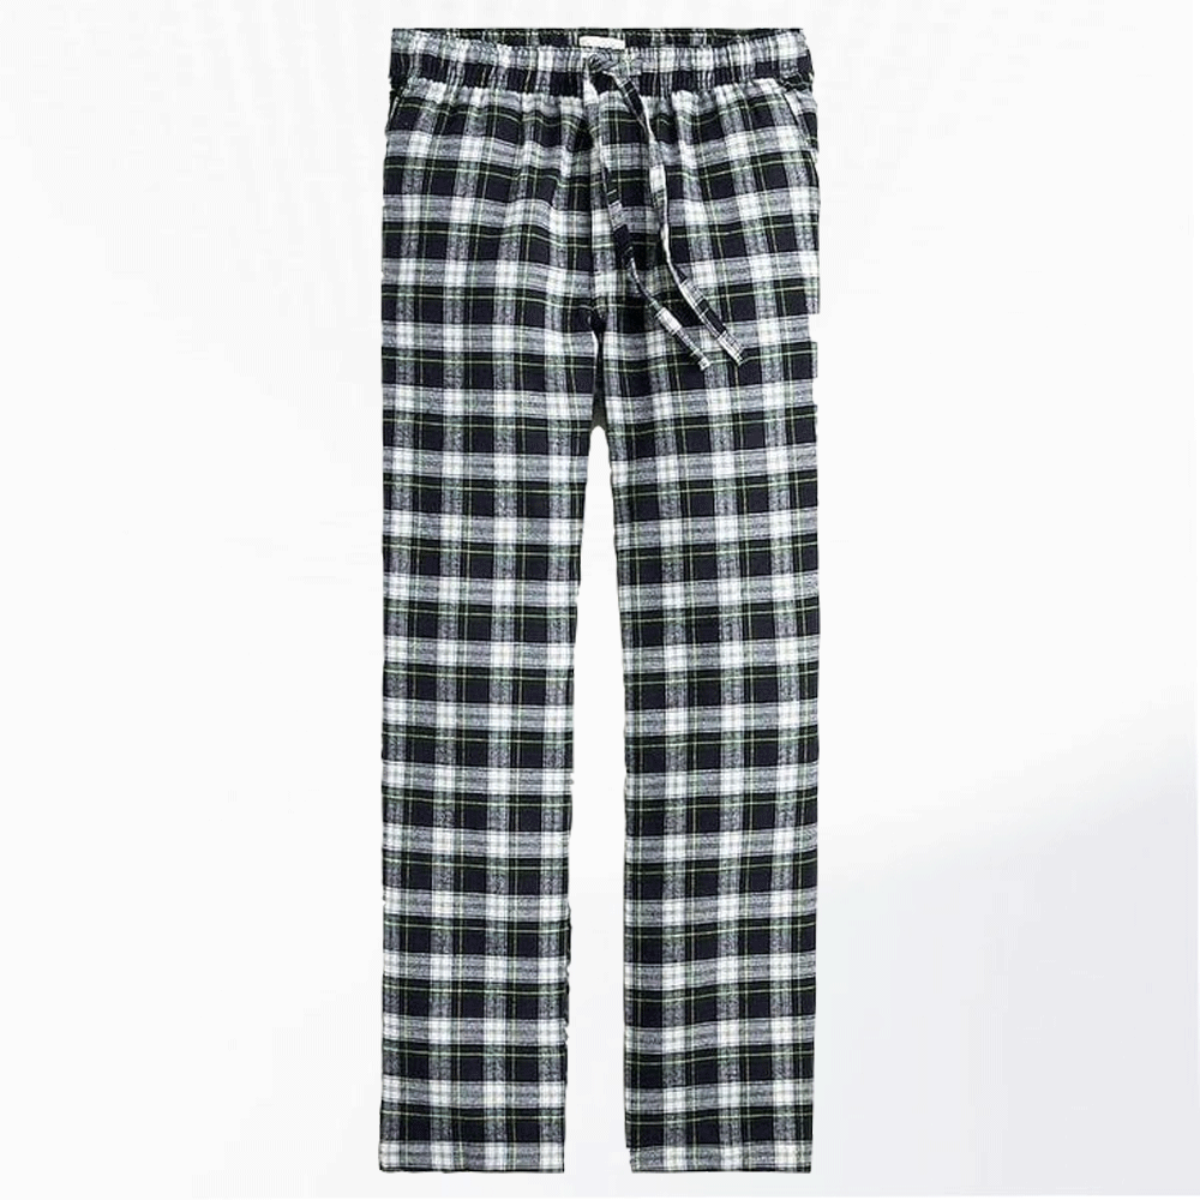 How to wear pajama pants: 11 Style Panel tips for taking sleepwear trend  out of bed and onto the streets - FASHION Magazine